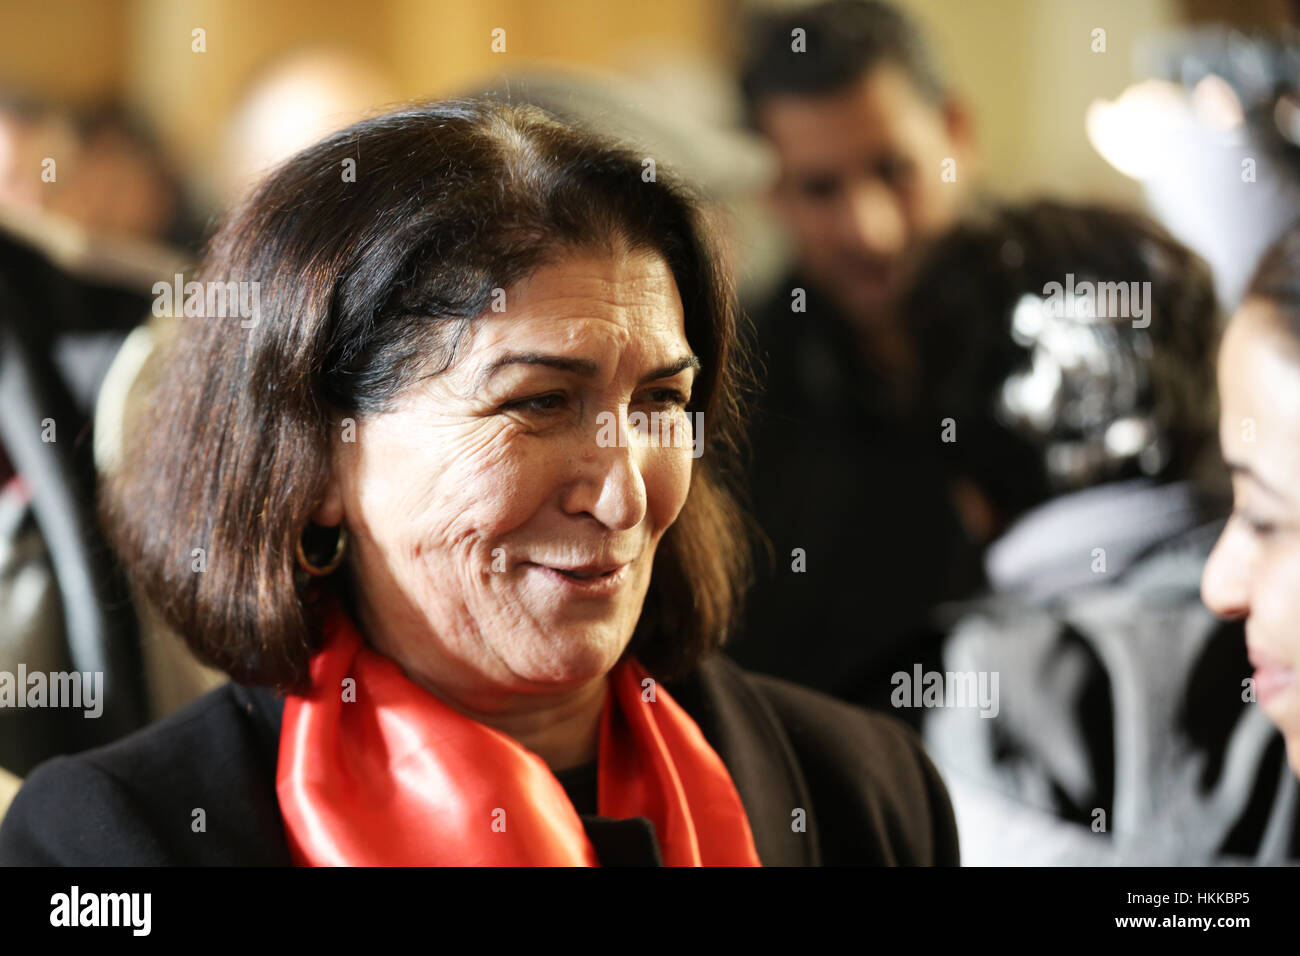 Naima Hammami the first Woman in the history of UGTT memeber in the excutive office .Tunisia, 26 January 2017. Taboubi was elected as the new general secretary of the UGTT, after the work of the 23rd congress of the trade union center. Stock Photo